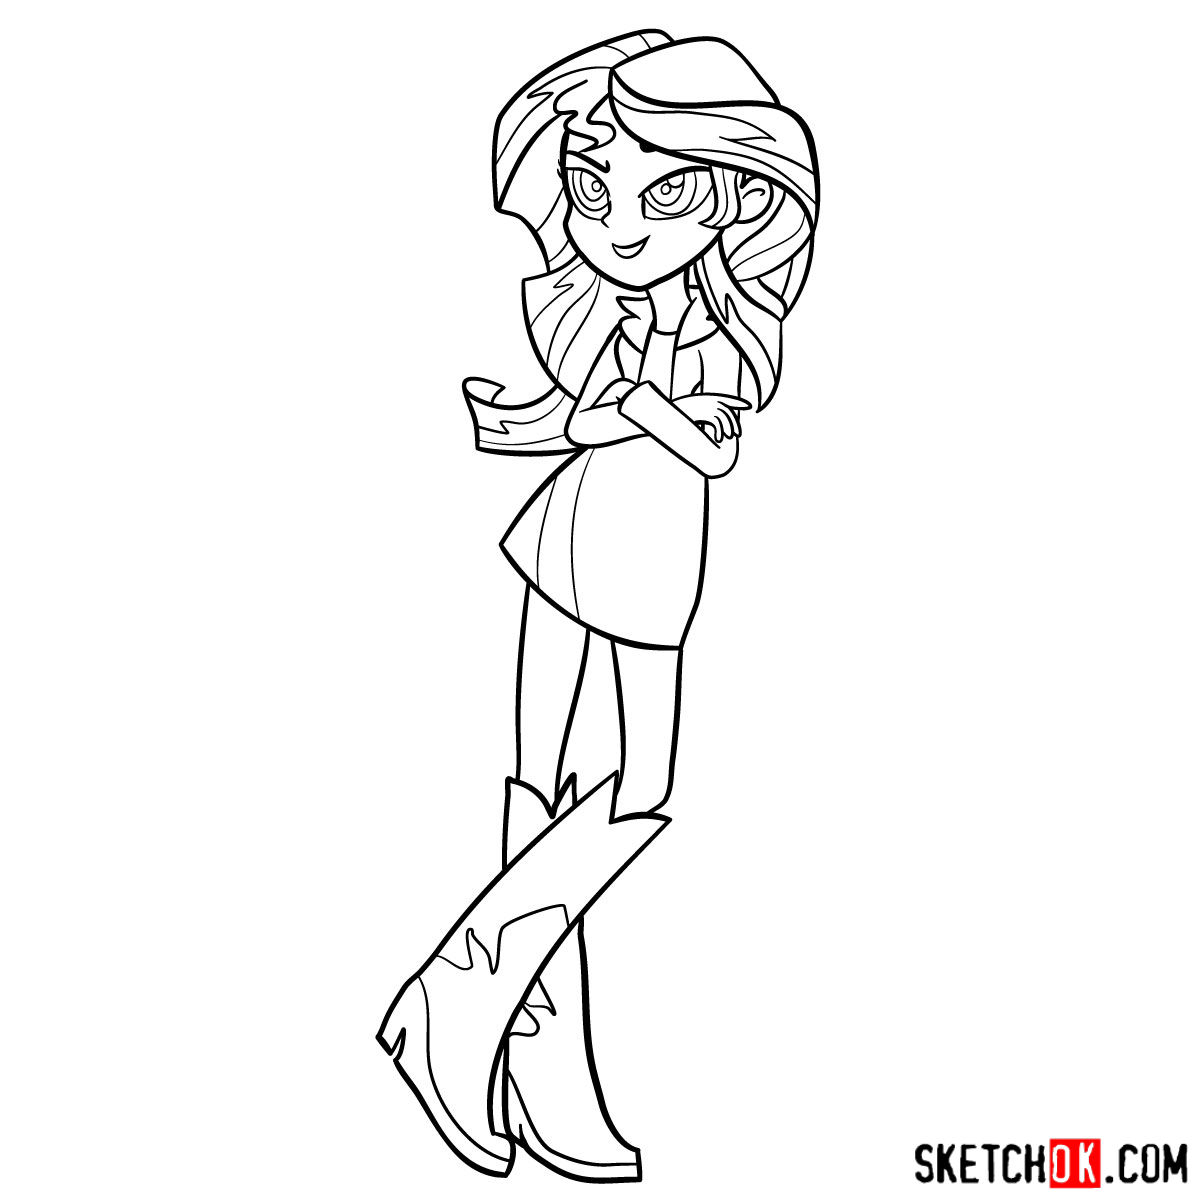 How to draw Sunset Shimmer - Equestria Girls - step 13